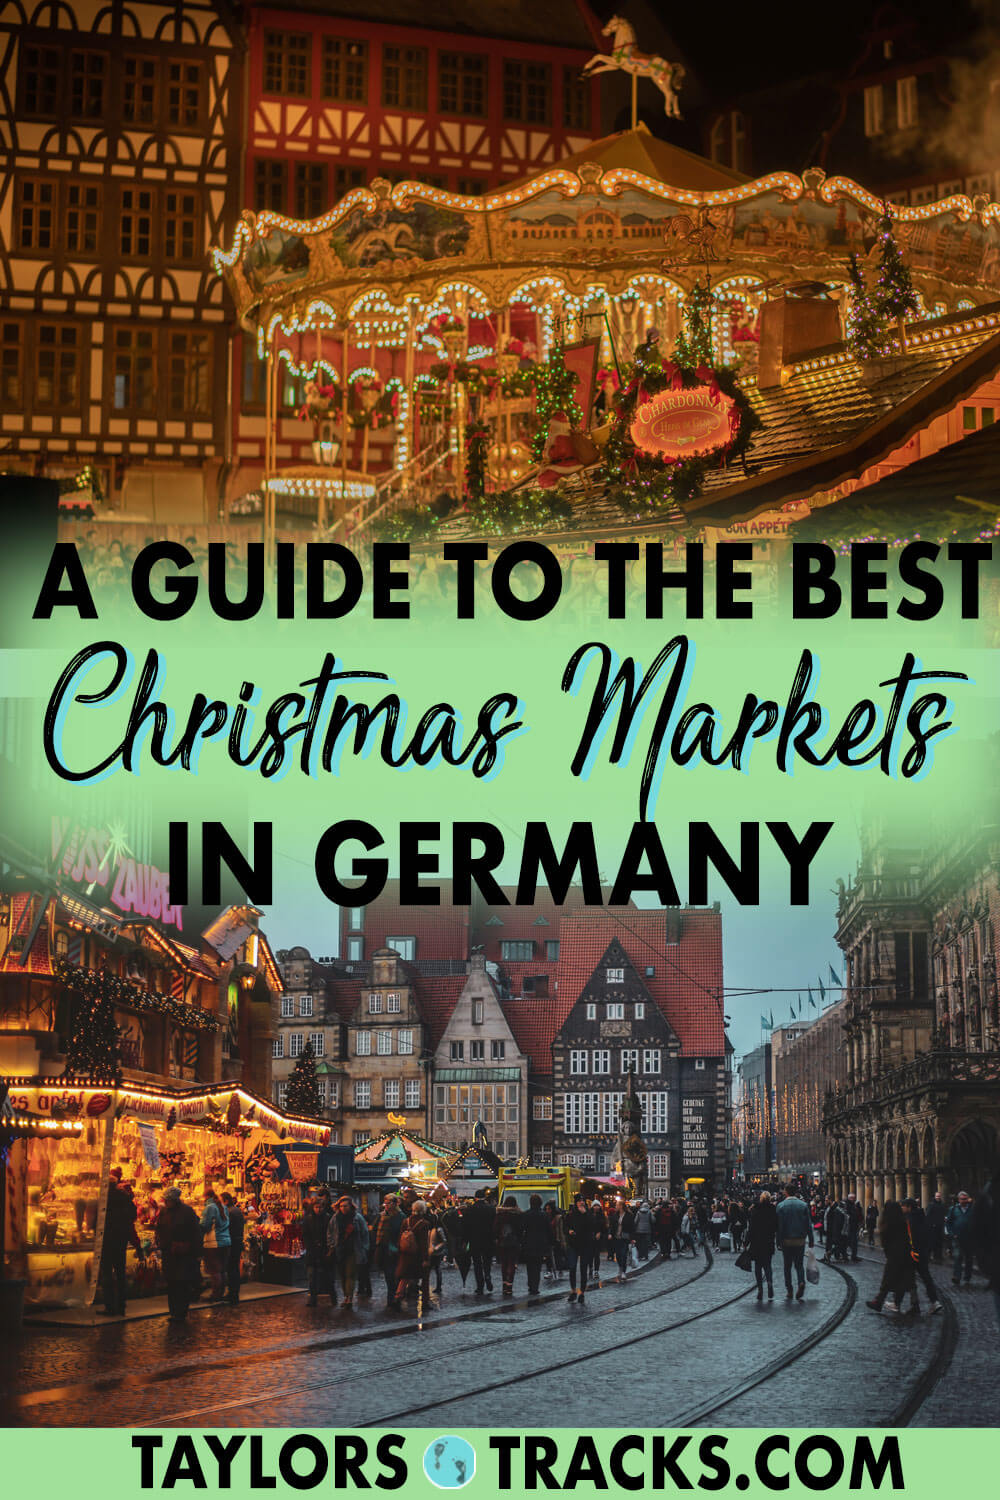 A Guide to the Most Magical Christmas Markets in Germany